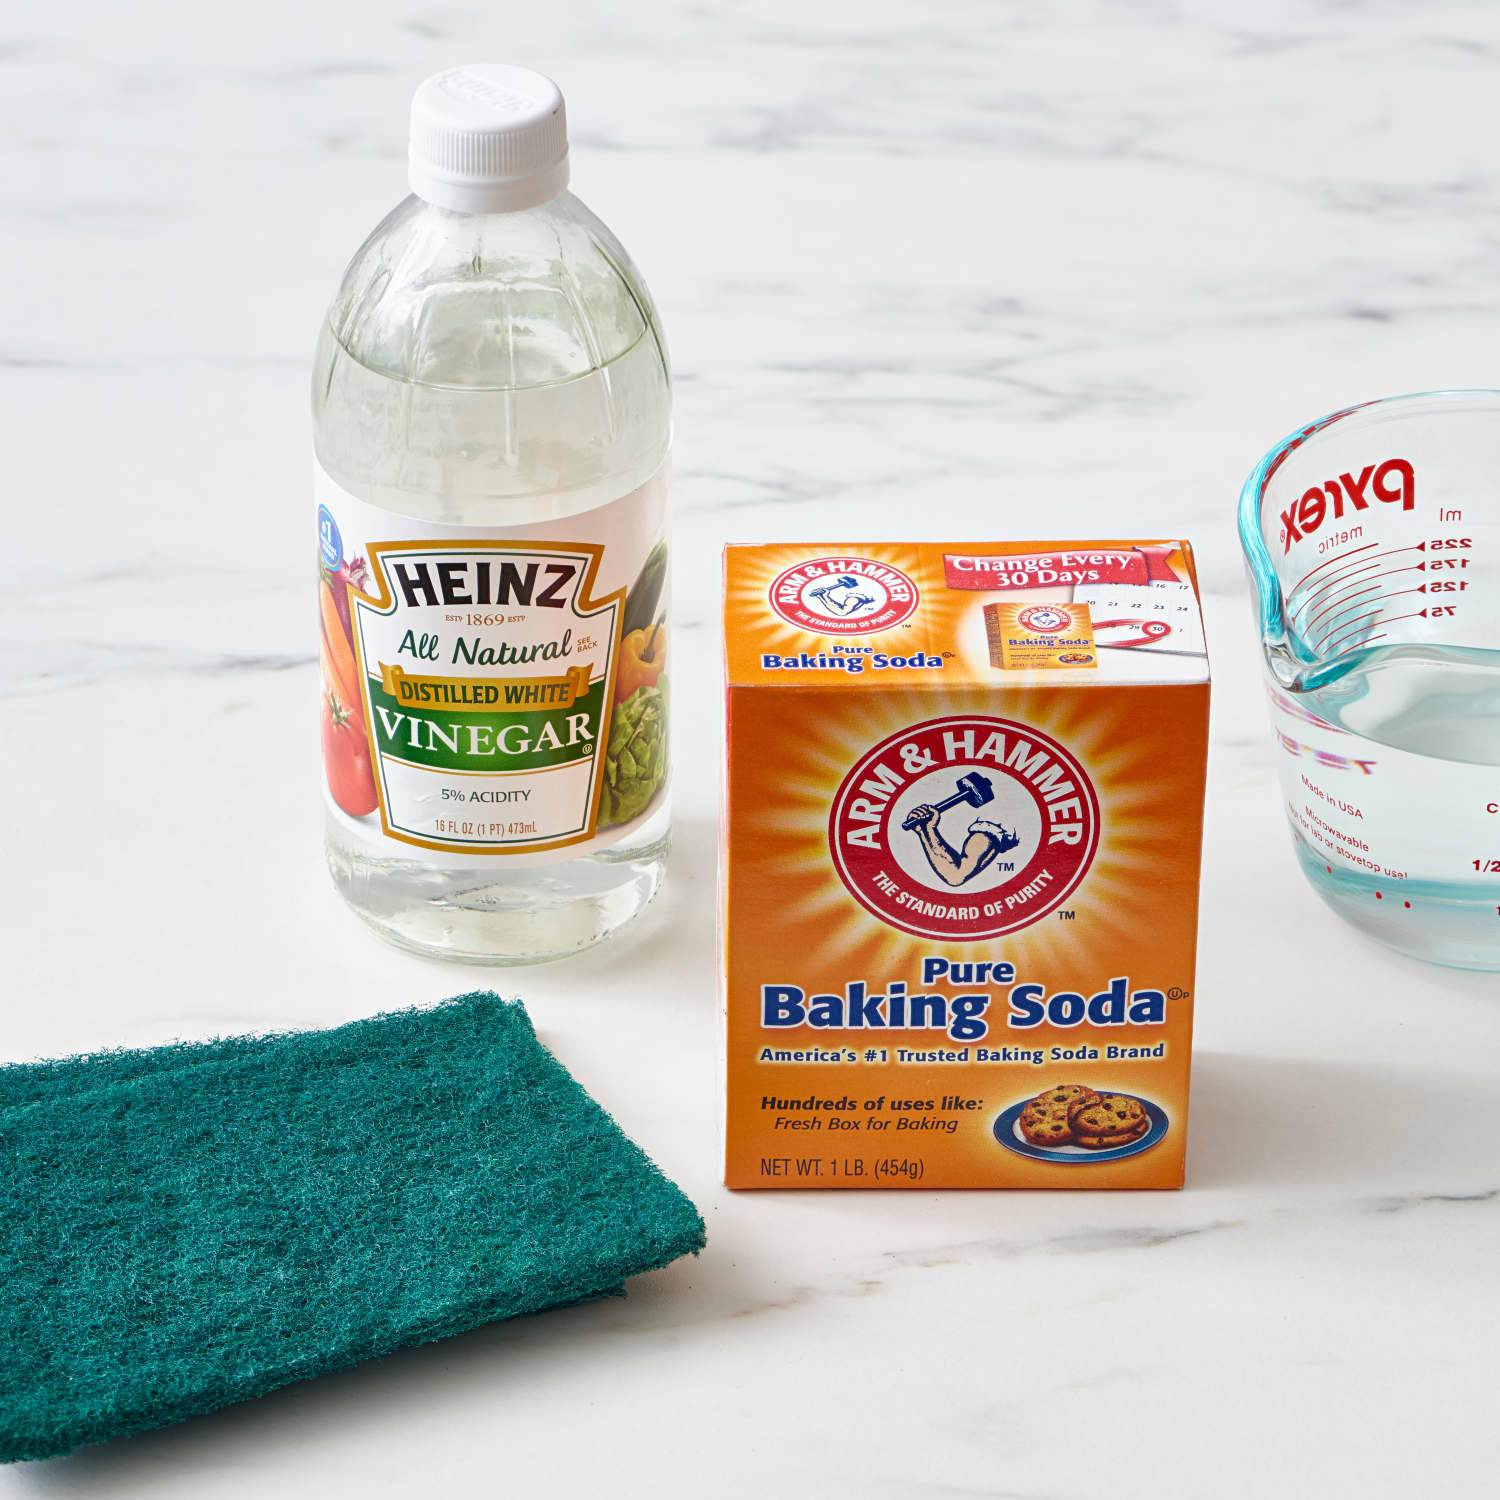 15 things you can clean with baking soda